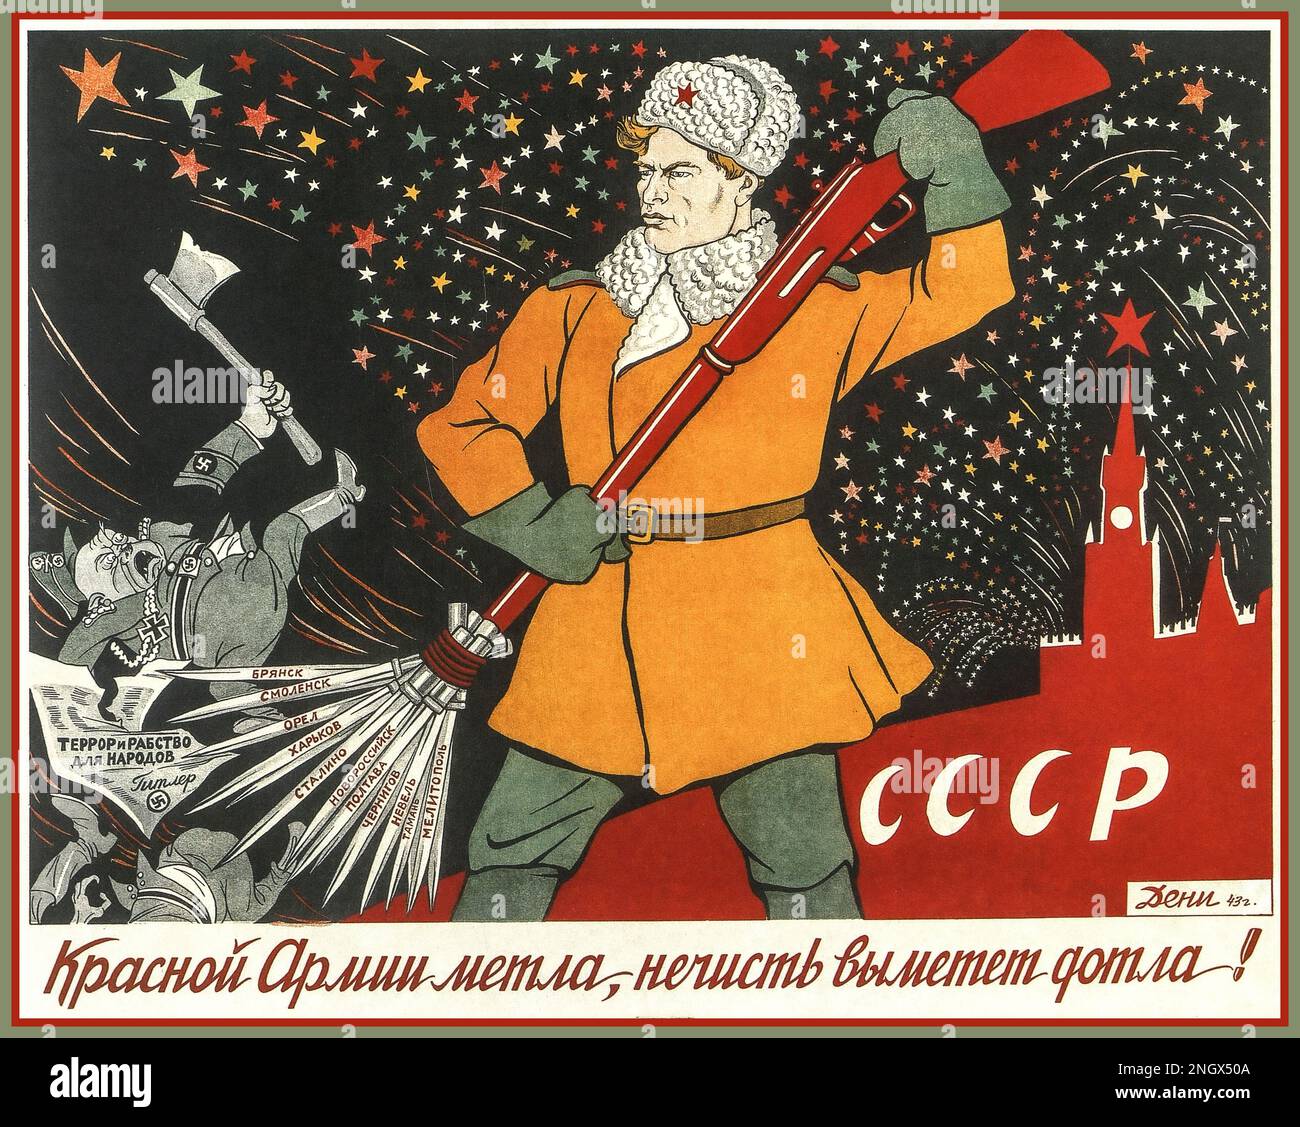 Vintage WW2 Soviet Russian USSR propaganda poster 'THE RED ARMY'S BROOM WILL SWEEP THE ENEMY AWAY''  featuring a Russian soldier fighting off a demonic Nazi soldier who is holding an axe. CCCP symbol on a Moscow skyline with Soviet Russian stars in the sky. 1940s Poster by Viktor Deni Moscow Russia Soviet Union Stock Photo